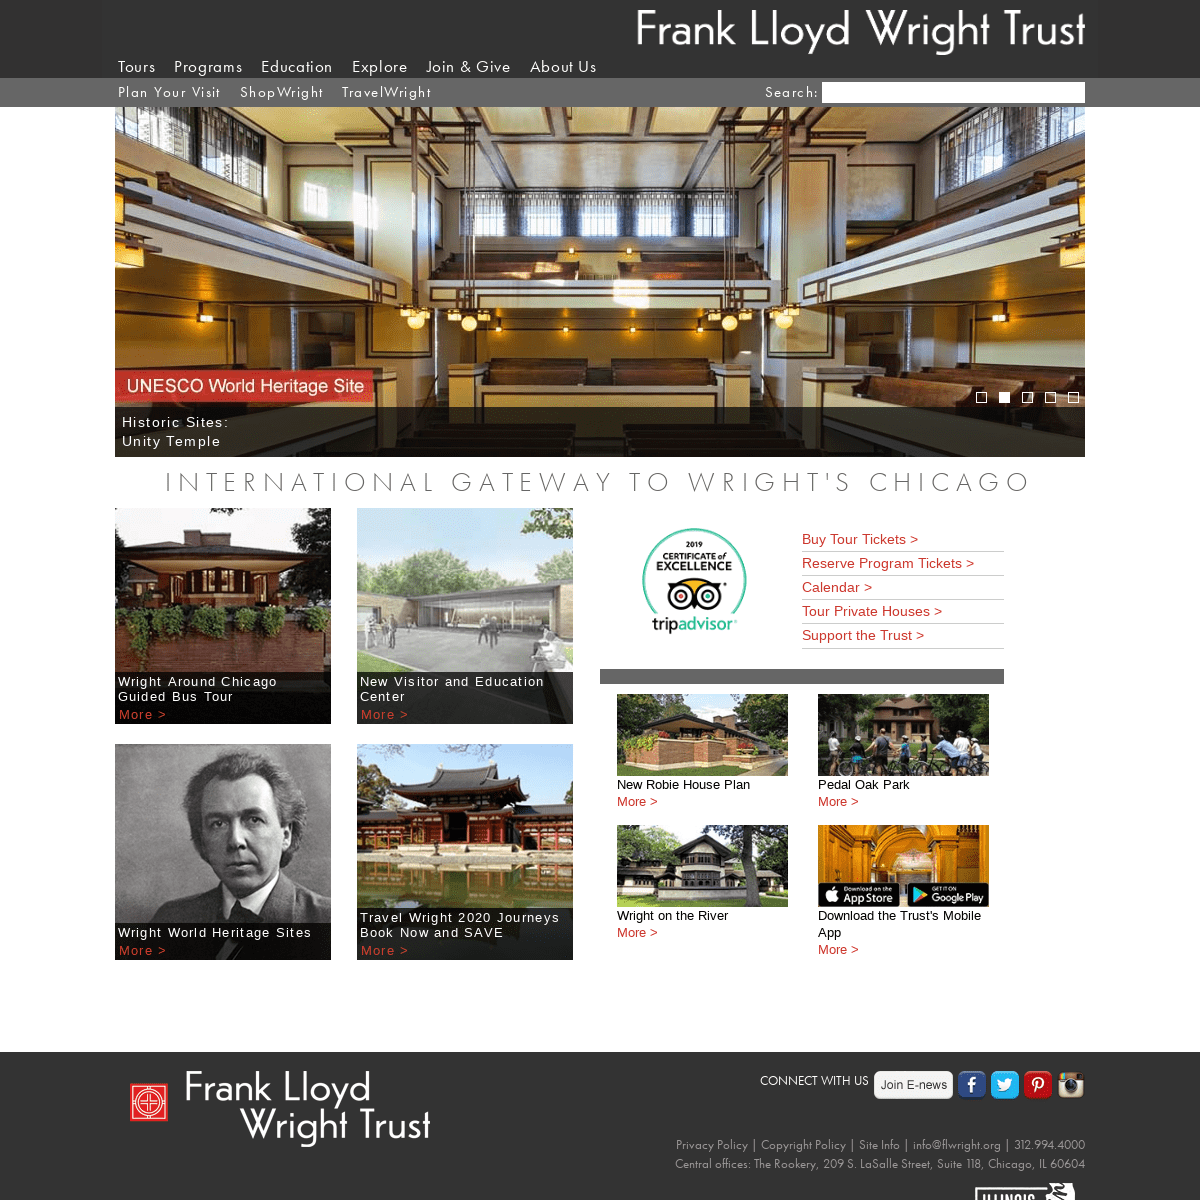 Architecture Tours in Chicago | Frank Lloyd Wright Trust